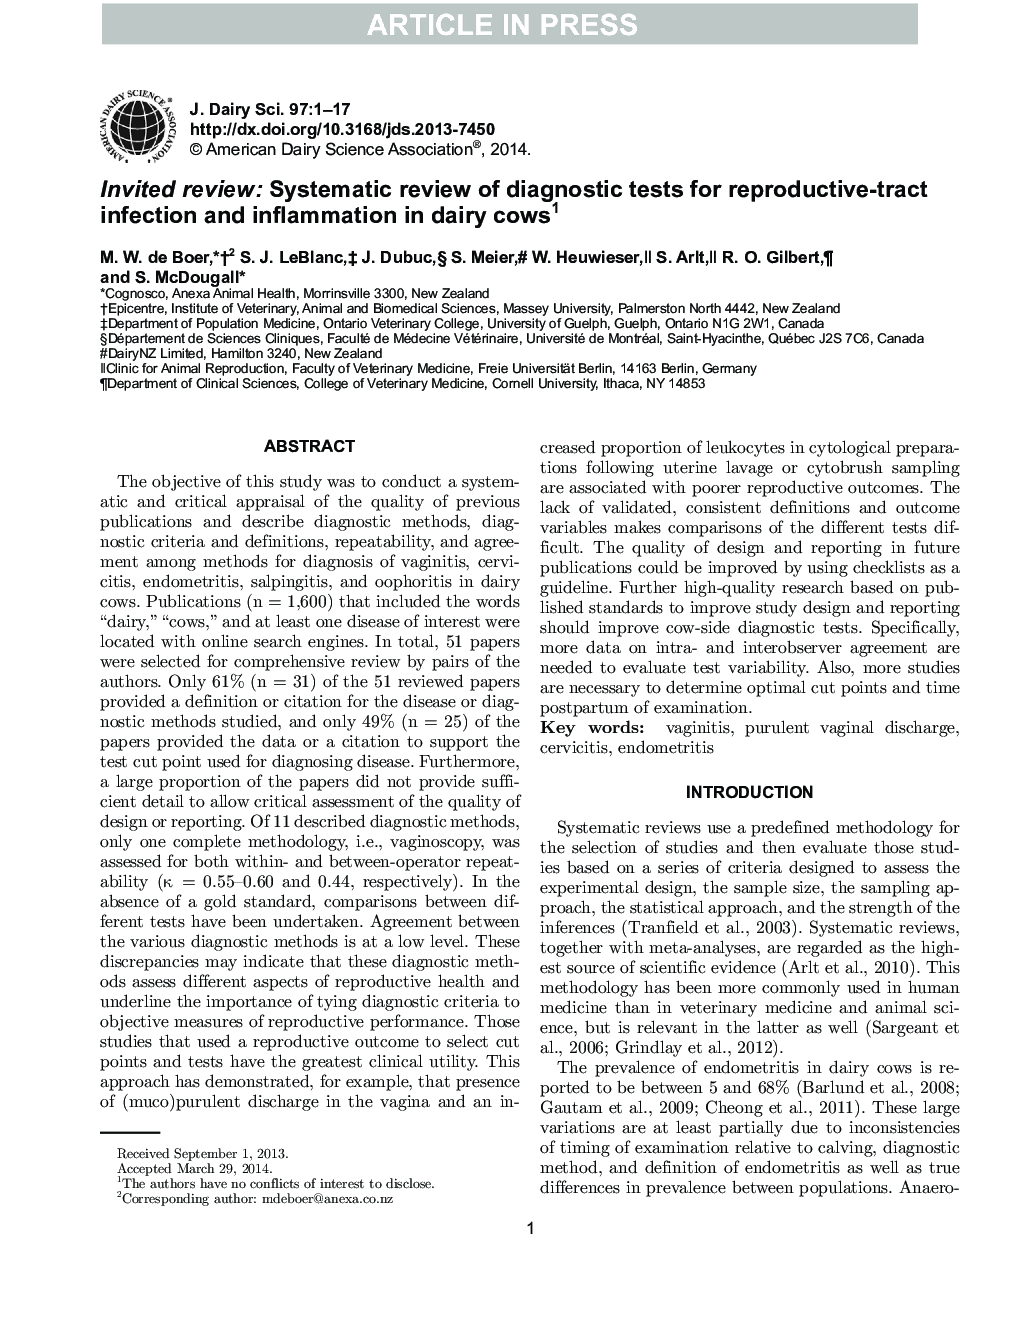 Invited review: Systematic review of diagnostic tests for reproductive-tract infection and inflammation in dairy cows1